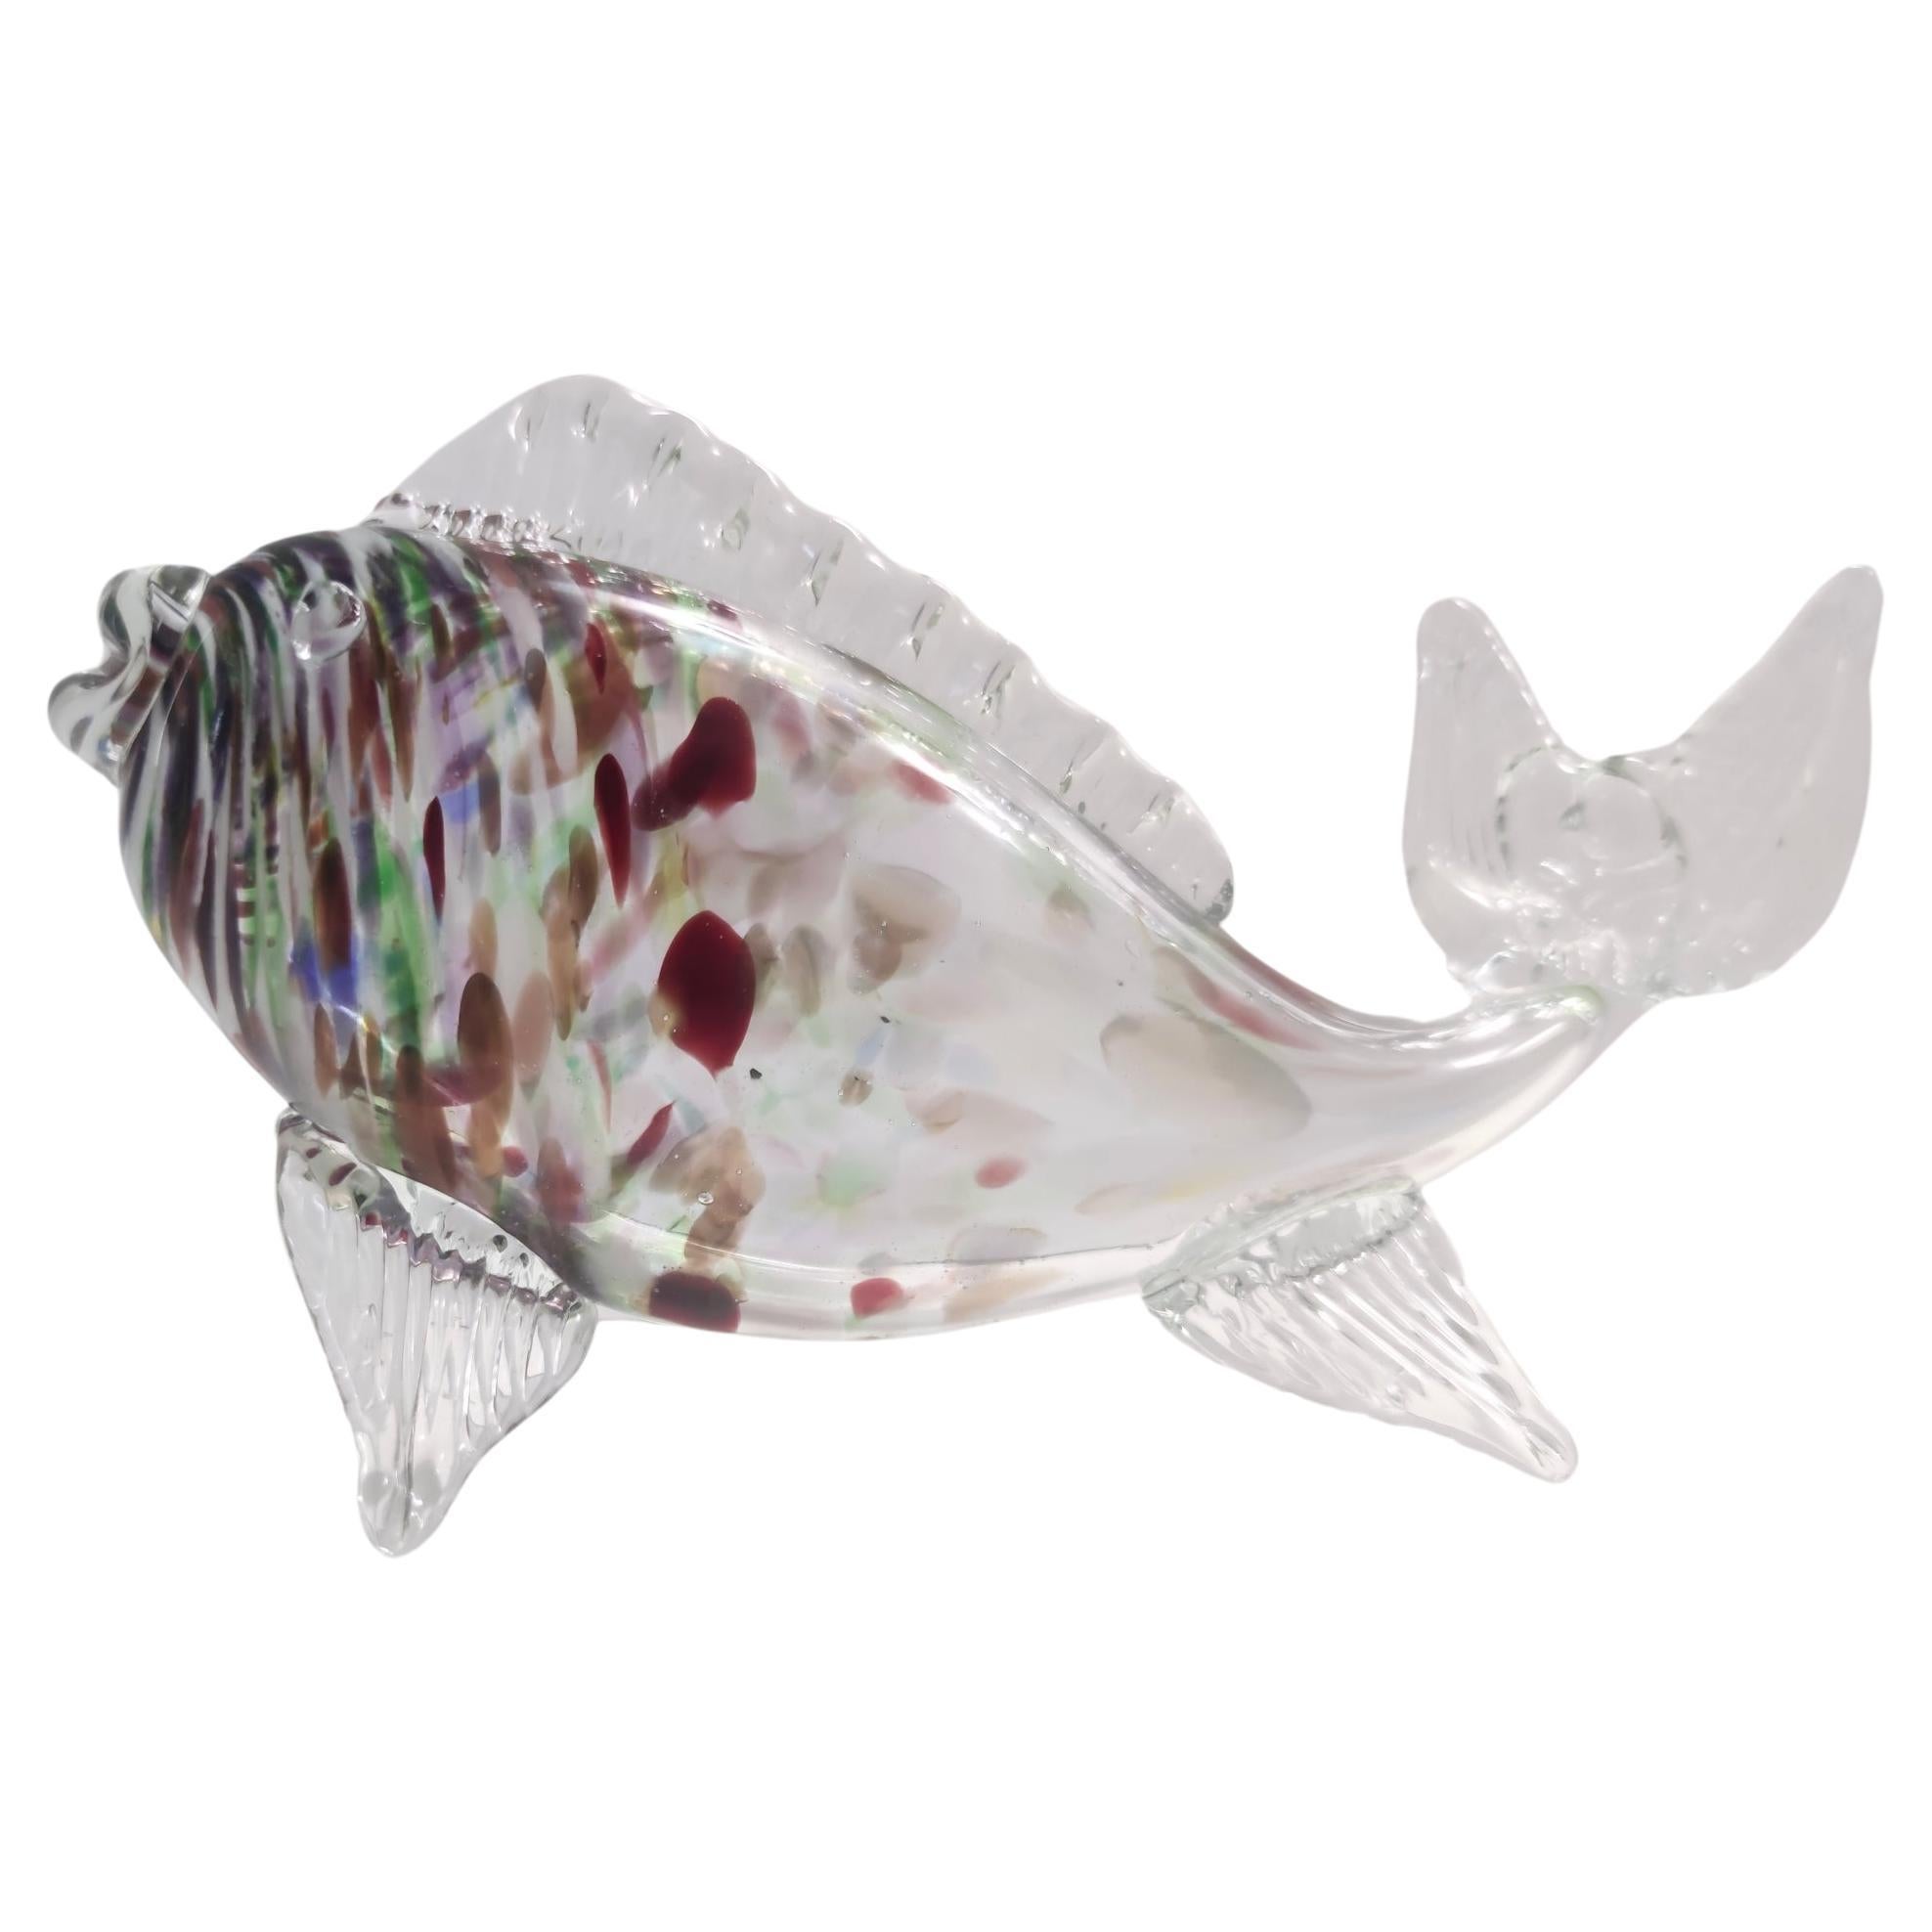 Vintage Murano Glass Fish Decorative Figurine by Fratelli Toso, Italy For Sale